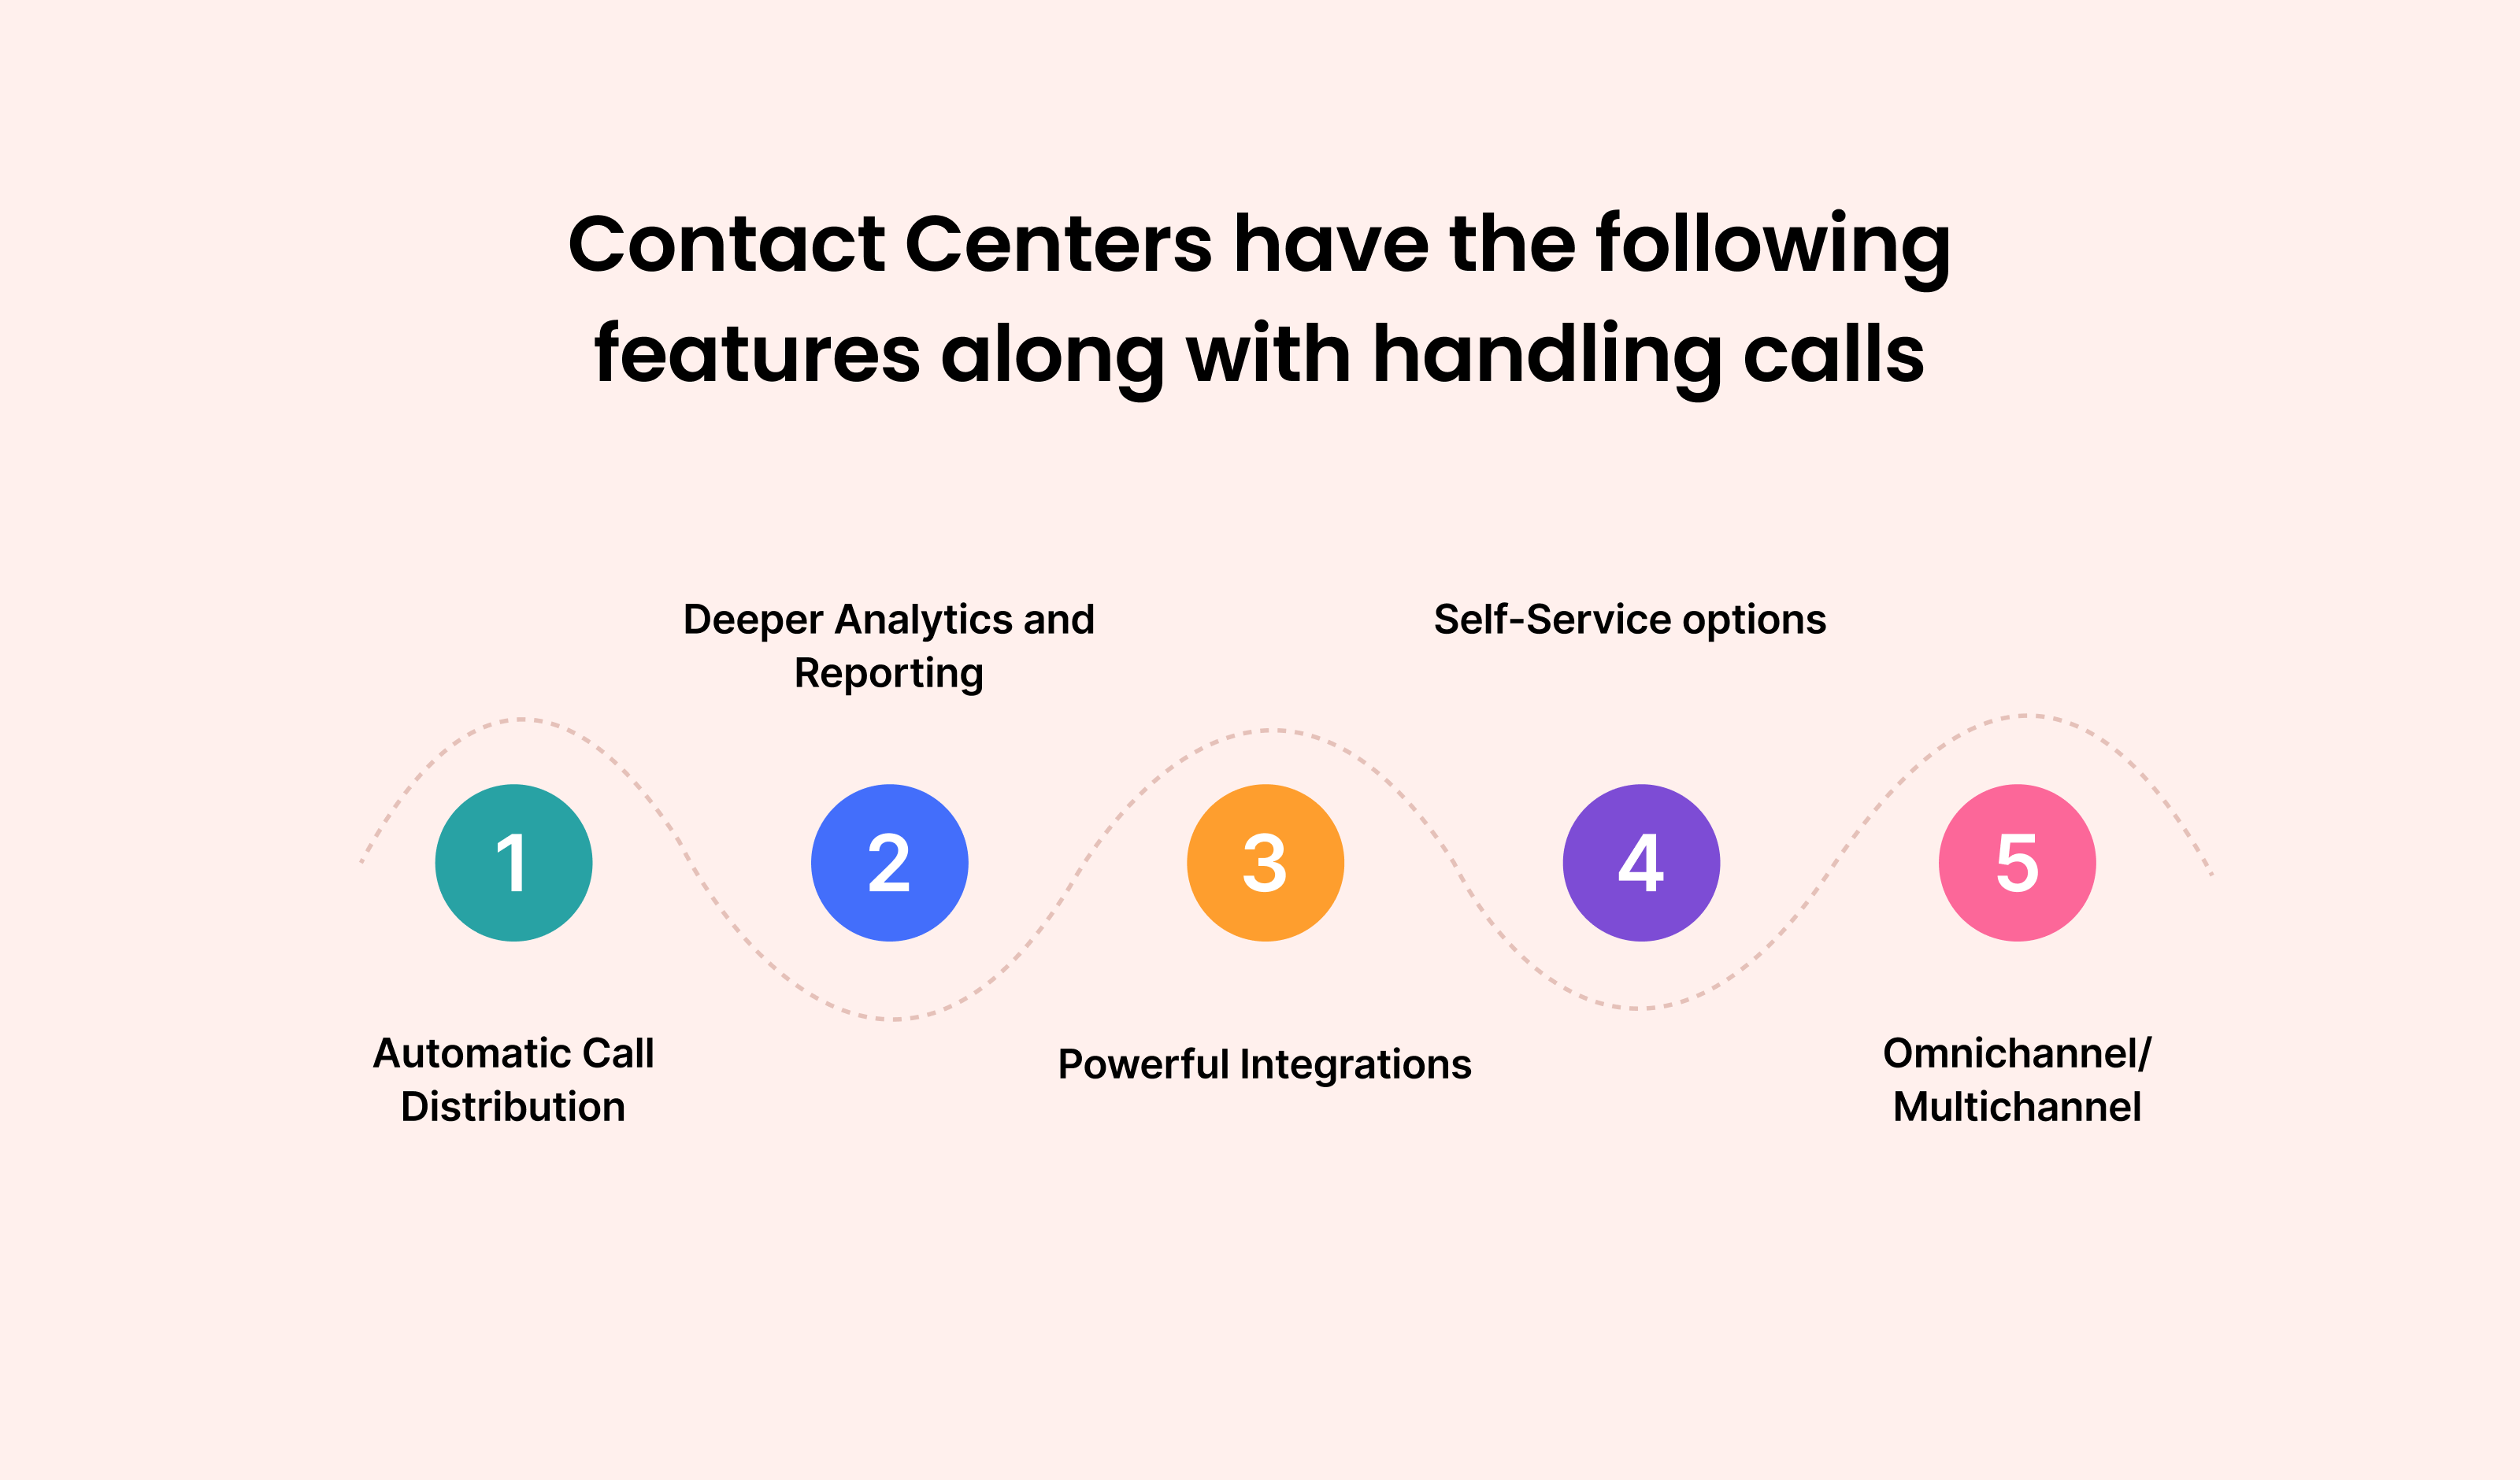 Contact Centers have the following features along with handling calls: